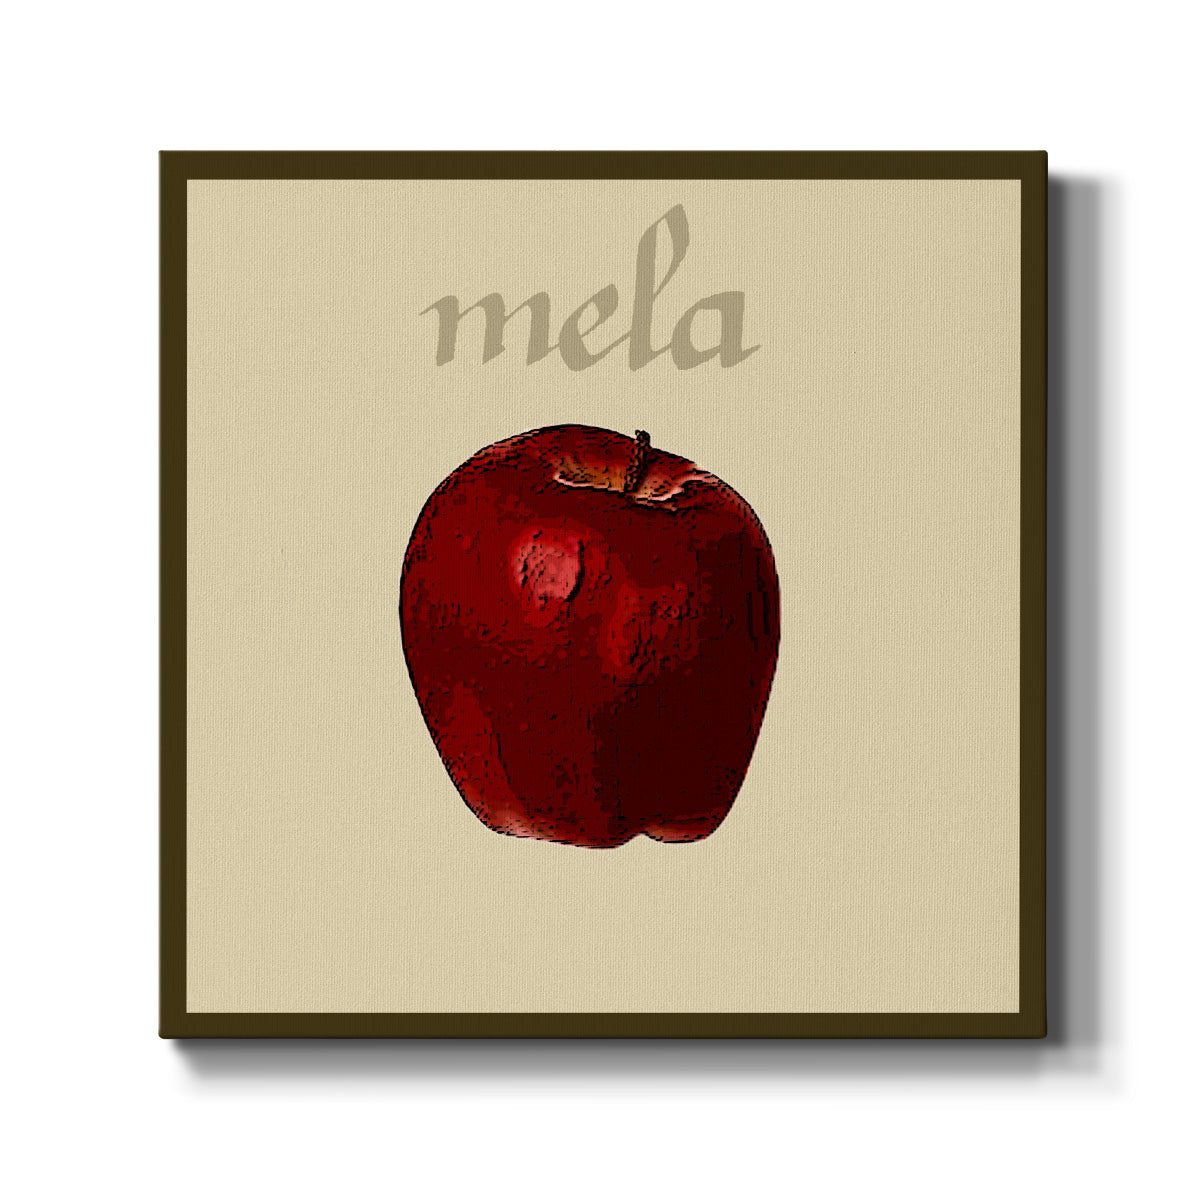 Italian Fruit VIII-Premium Gallery Wrapped Canvas - Ready to Hang